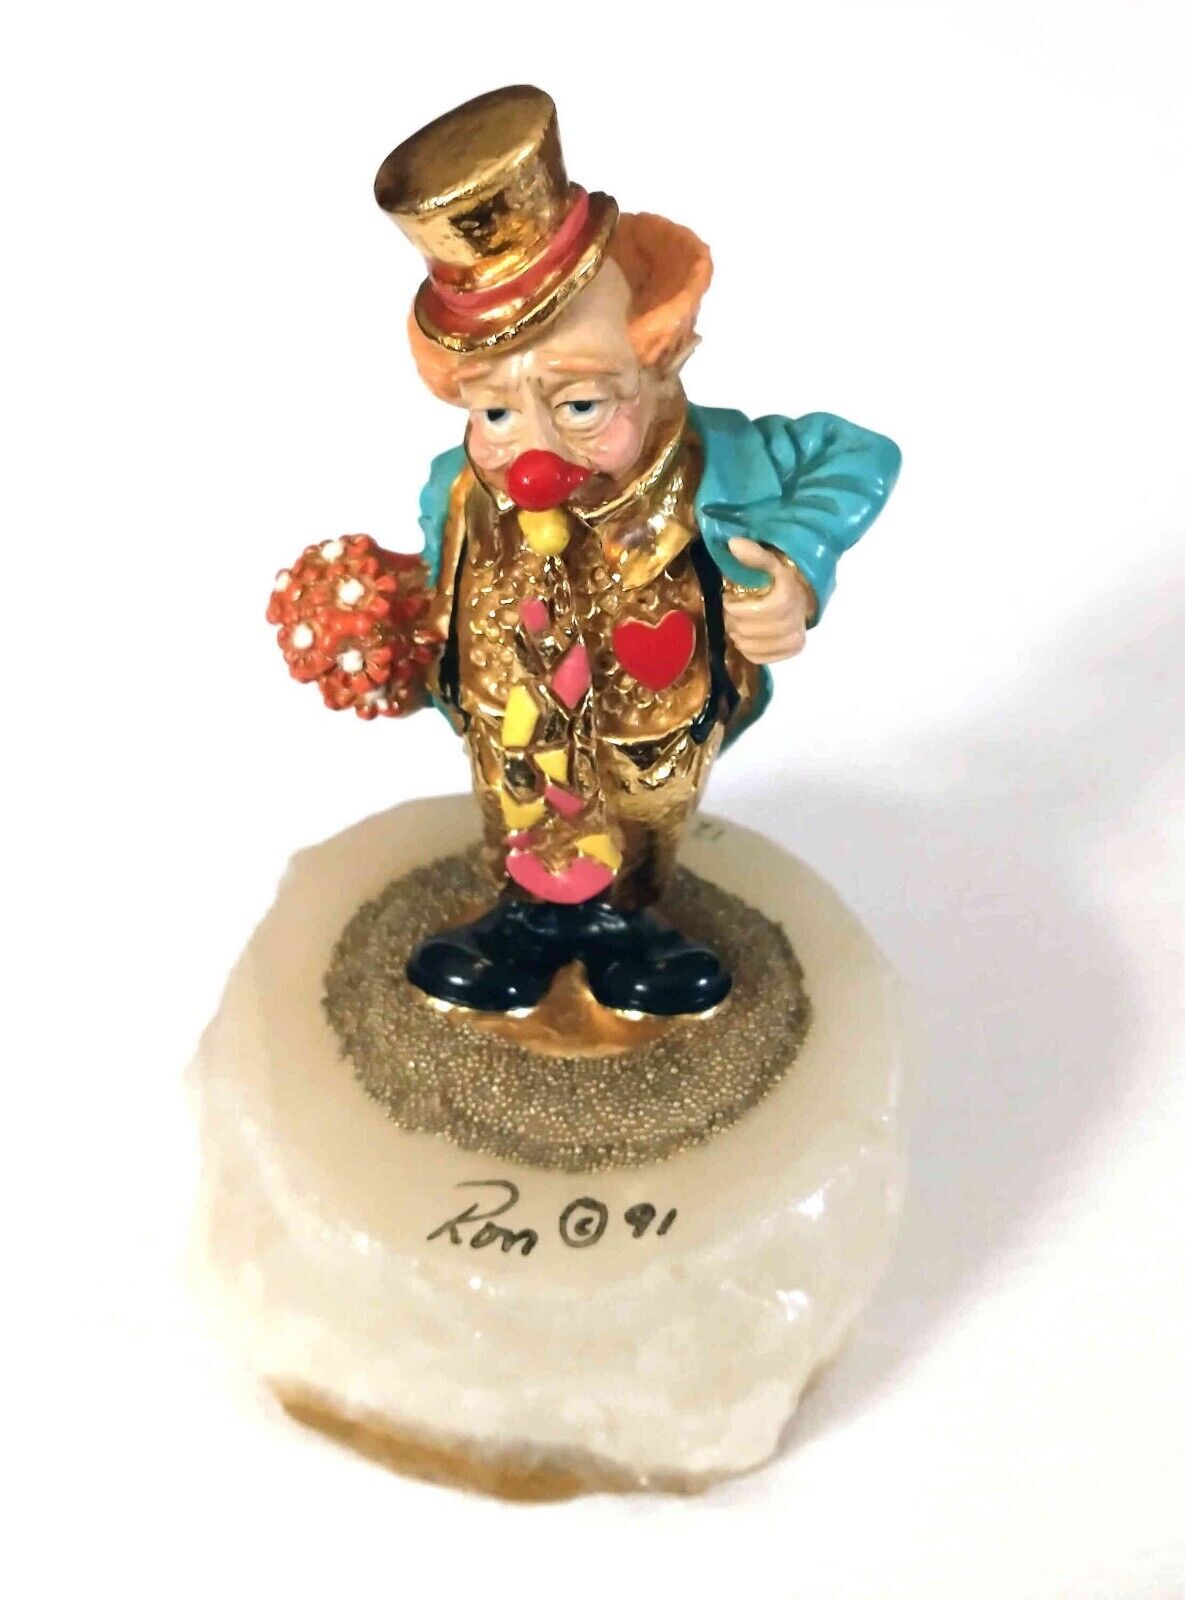 1991 Ron Lee Signed Clown Figurine ‘My Affections’ 